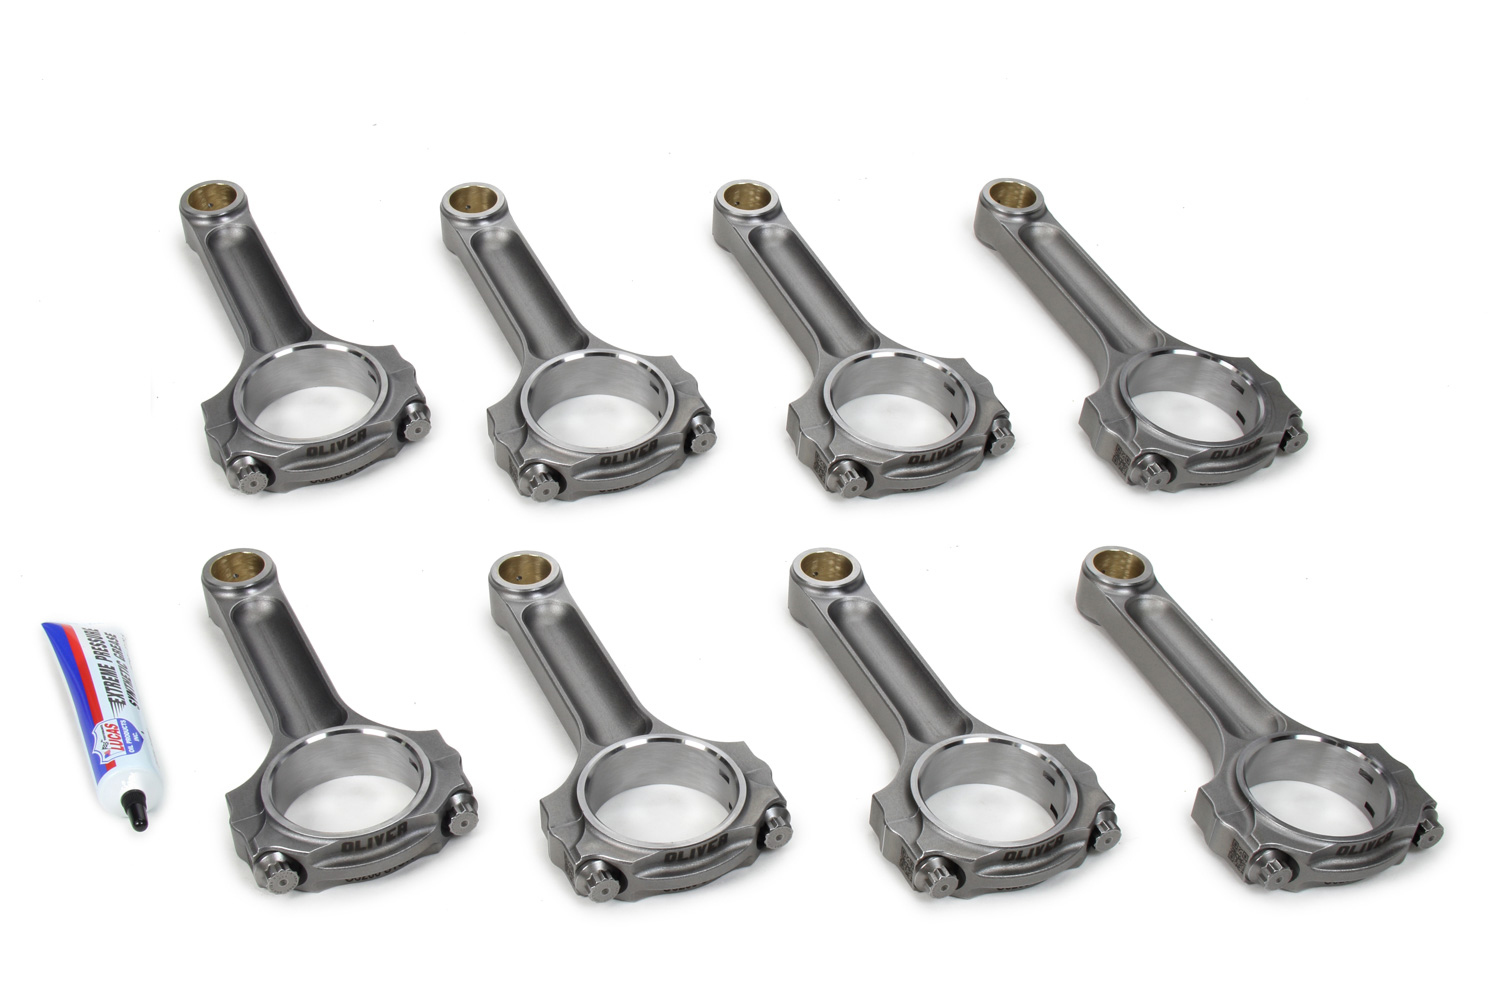 Oliver Rods C6000STLT8 Connecting Rod, Standard Light, I Beam, 6.000 in Long, Bushed, 7/16 in Cap Screws, Forged Steel, Small Block Chevy, Set of 8